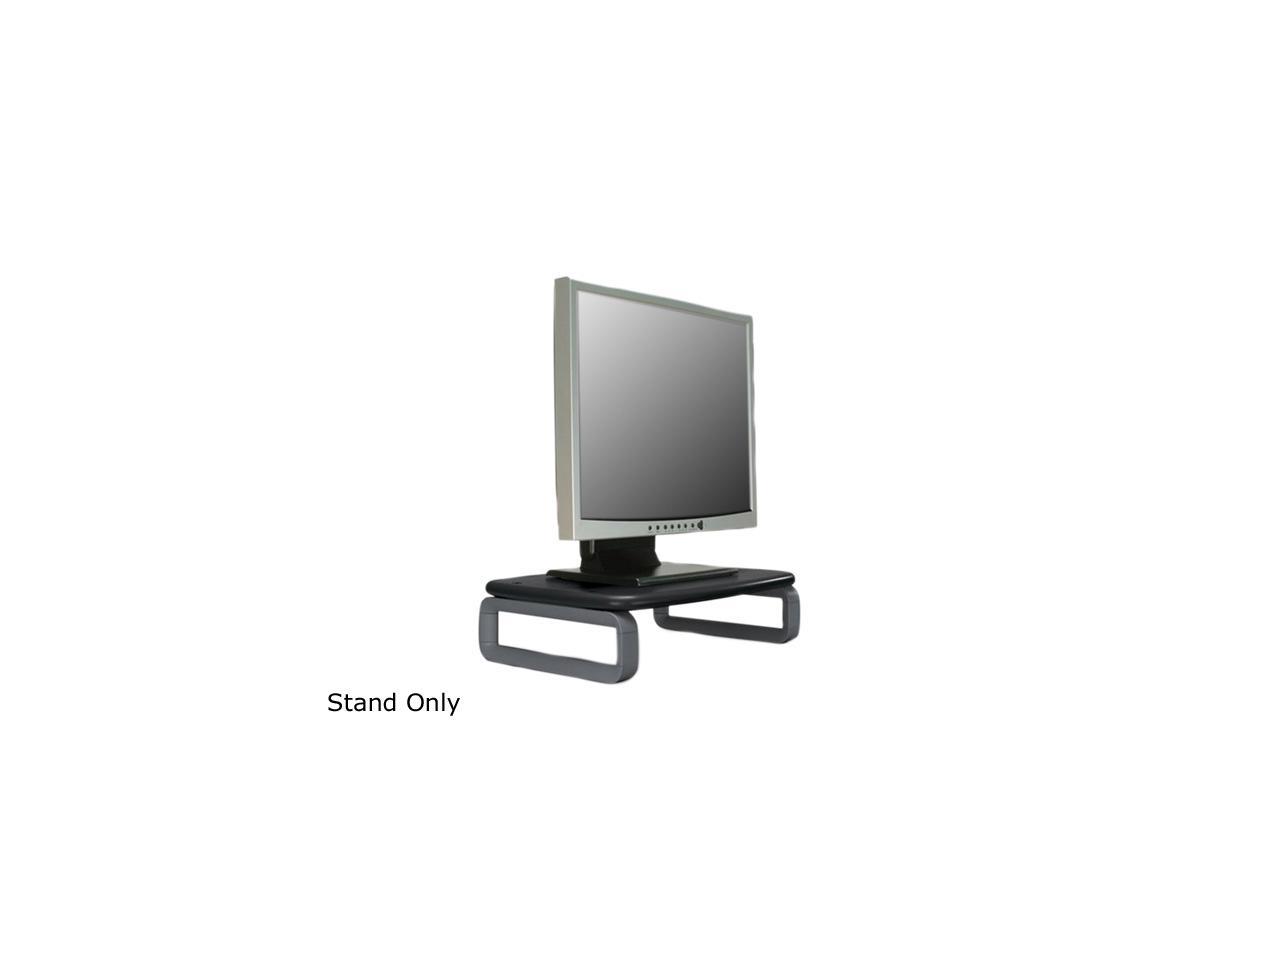 Kensington 60089 Monitor Stand Plus with SmartFit System for up to 24" screens, Black/Gray